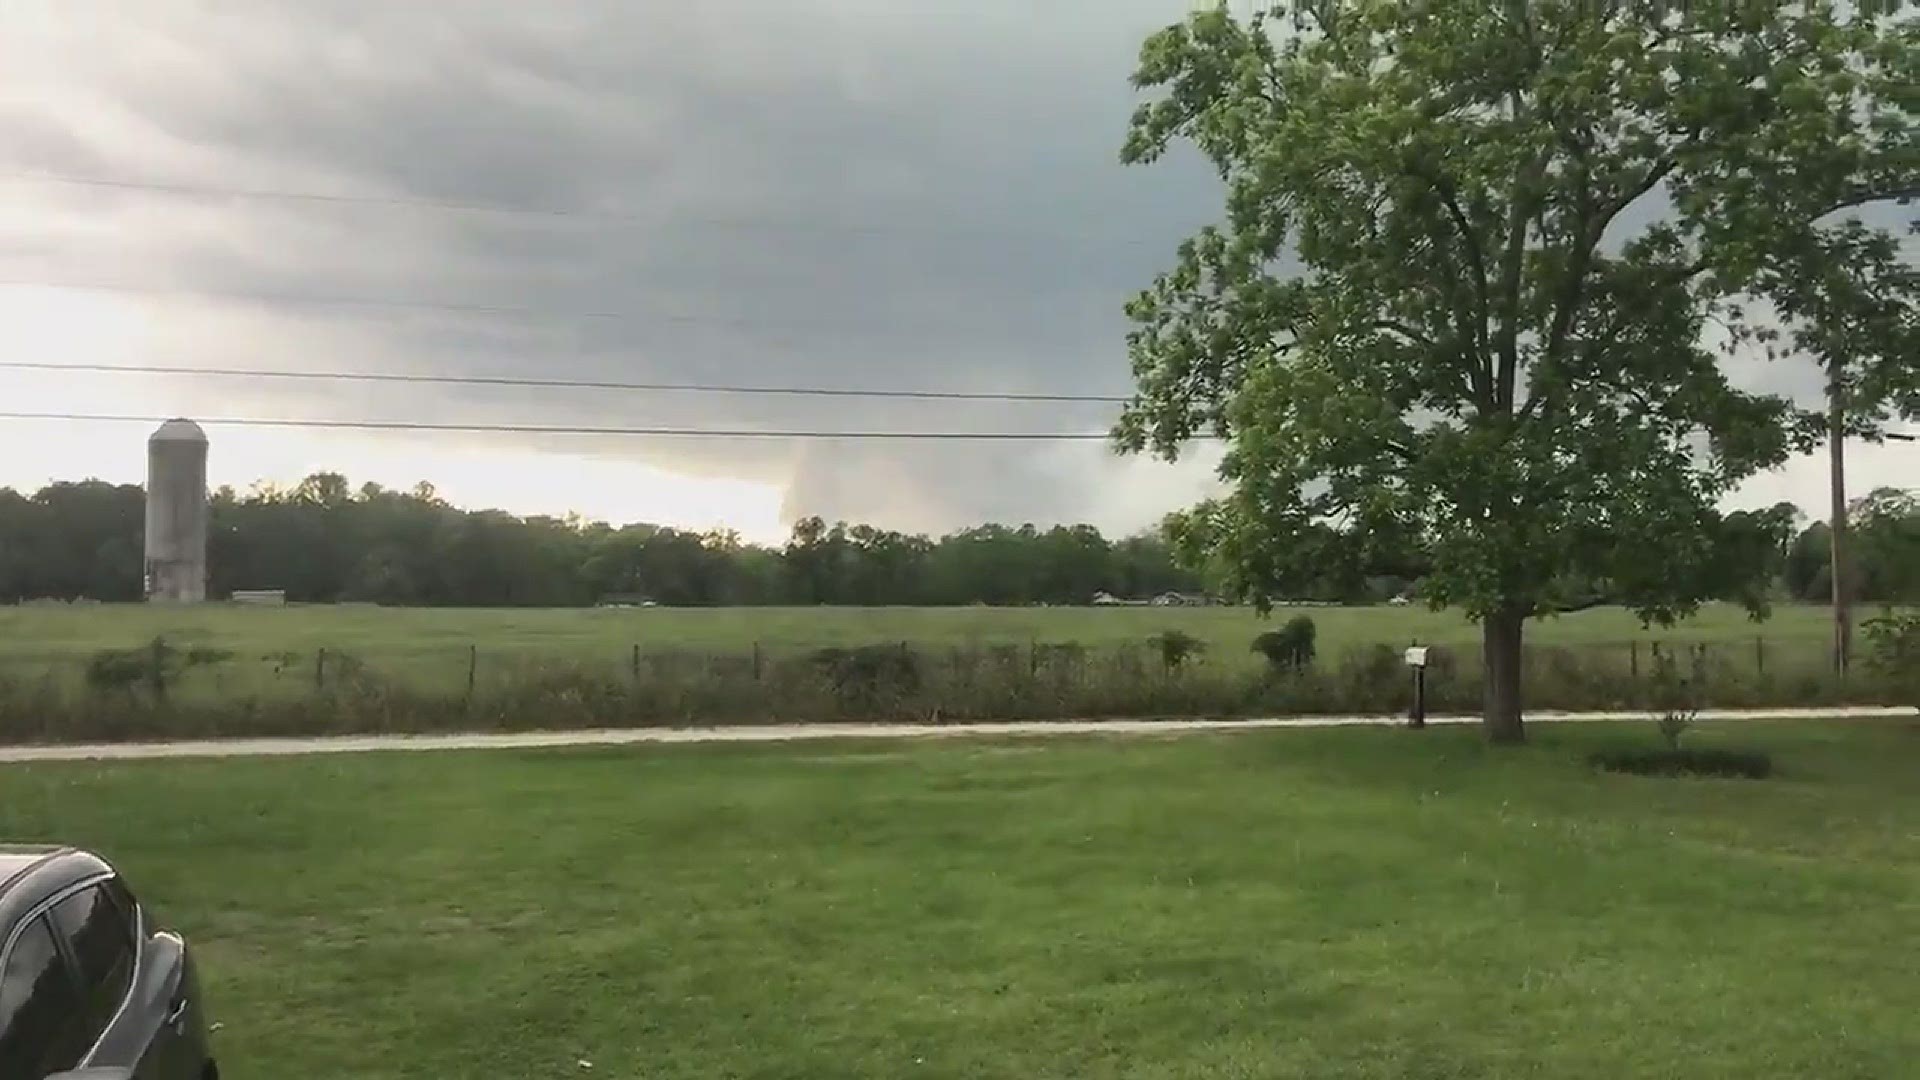 John Stephens shared this photo with our storm team after he and his wife observed a funnel cloud near his parents home. They called and gave them a heads up.